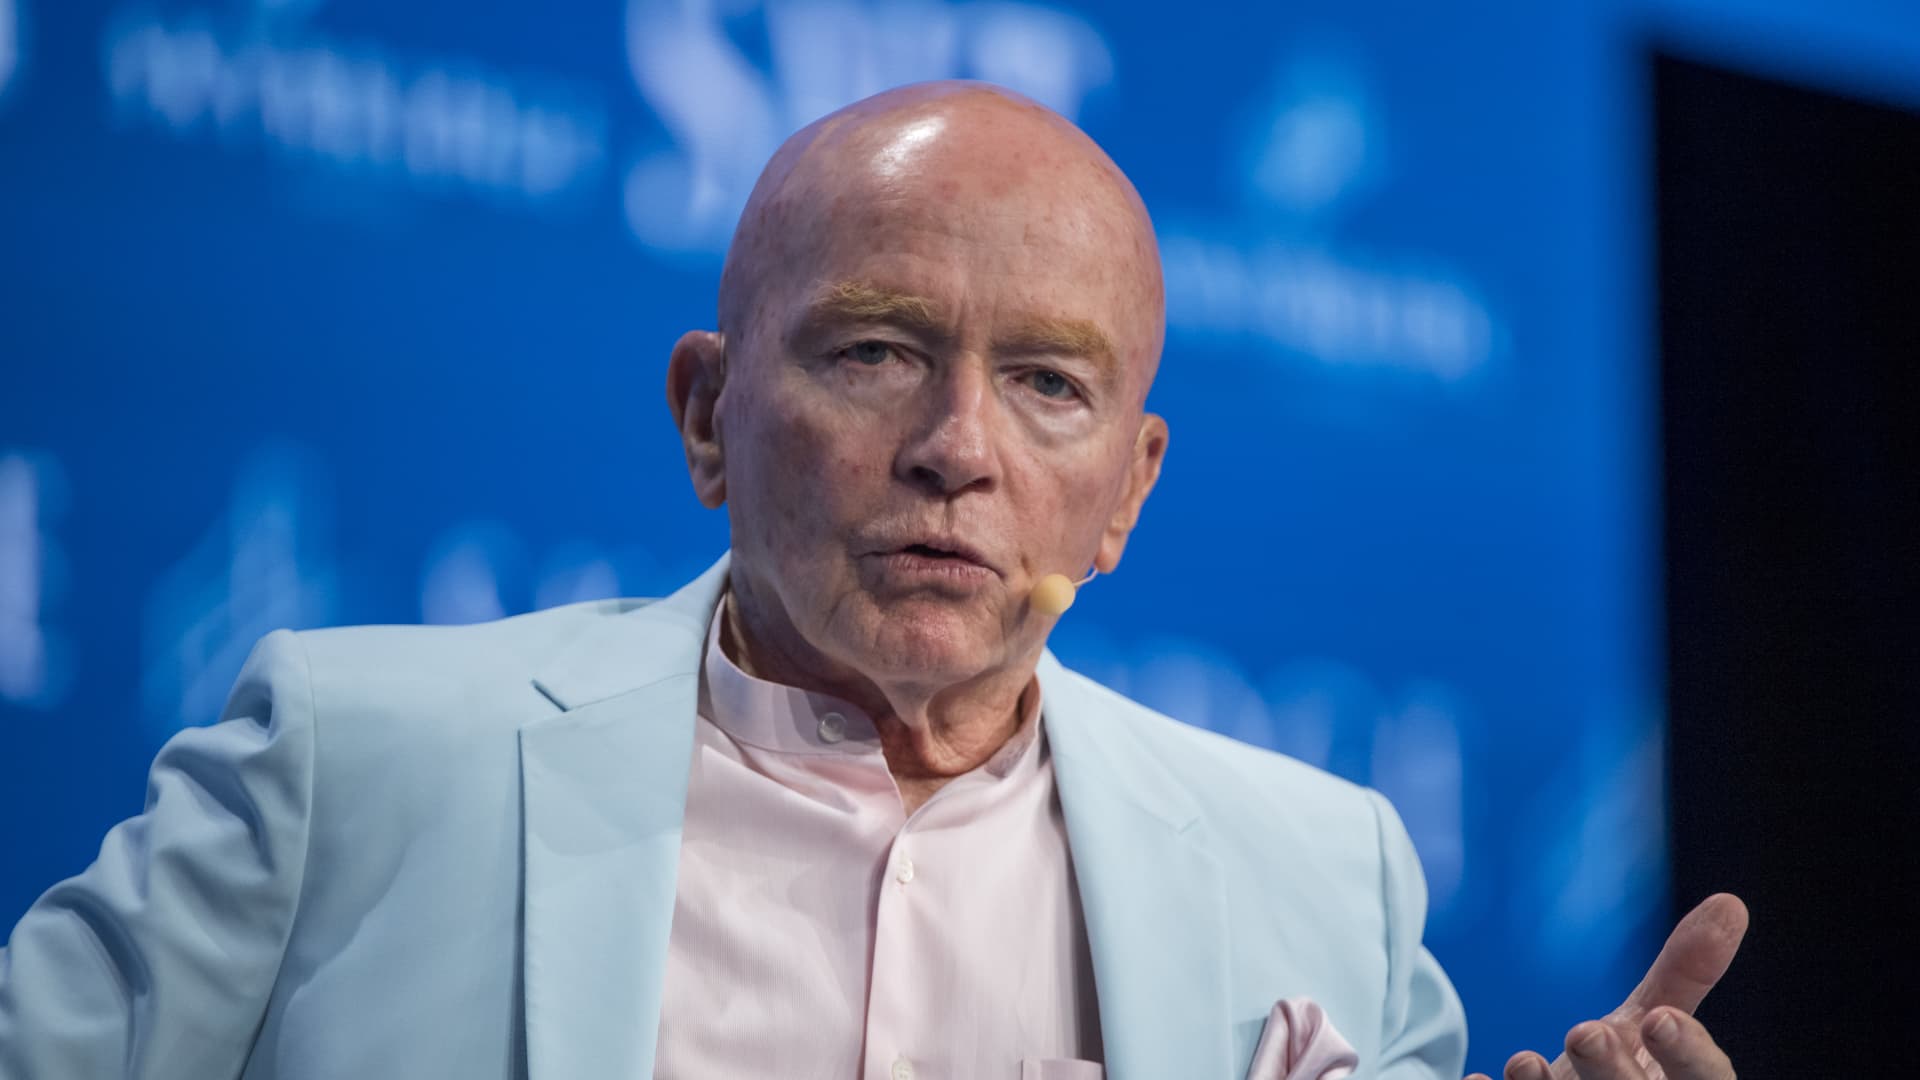 Bitcoin price could fall 40% to $10,000 in 2023, Mark Mobius says